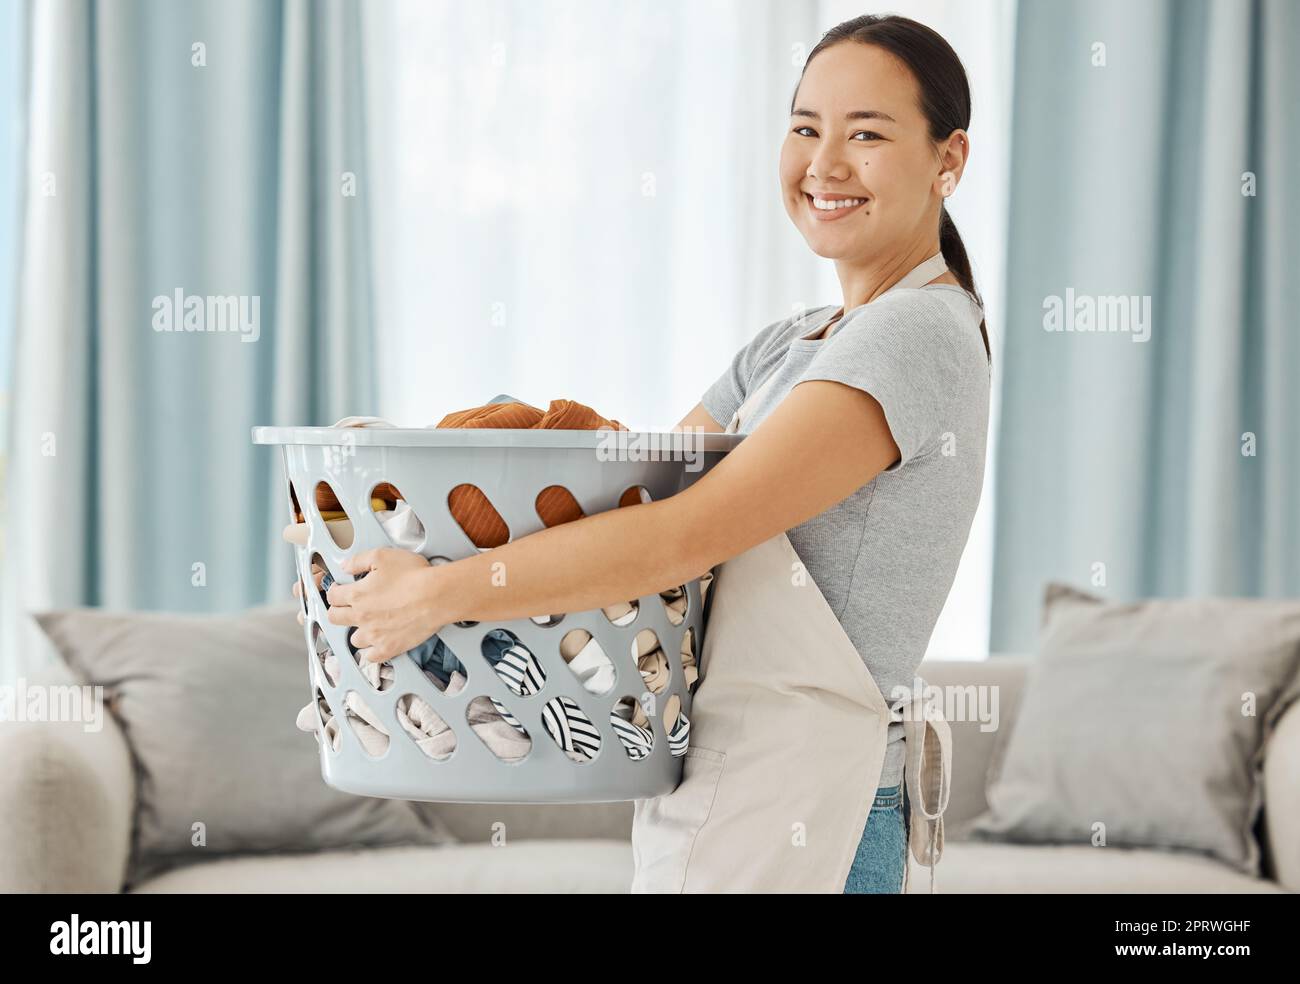 Happy Asian cleaner woman with laundry working for home, house or hotel hospitality cleaning help service agency. Japanese girl maid or worker smile in apartment with dirty clothes in washing basket Stock Photo